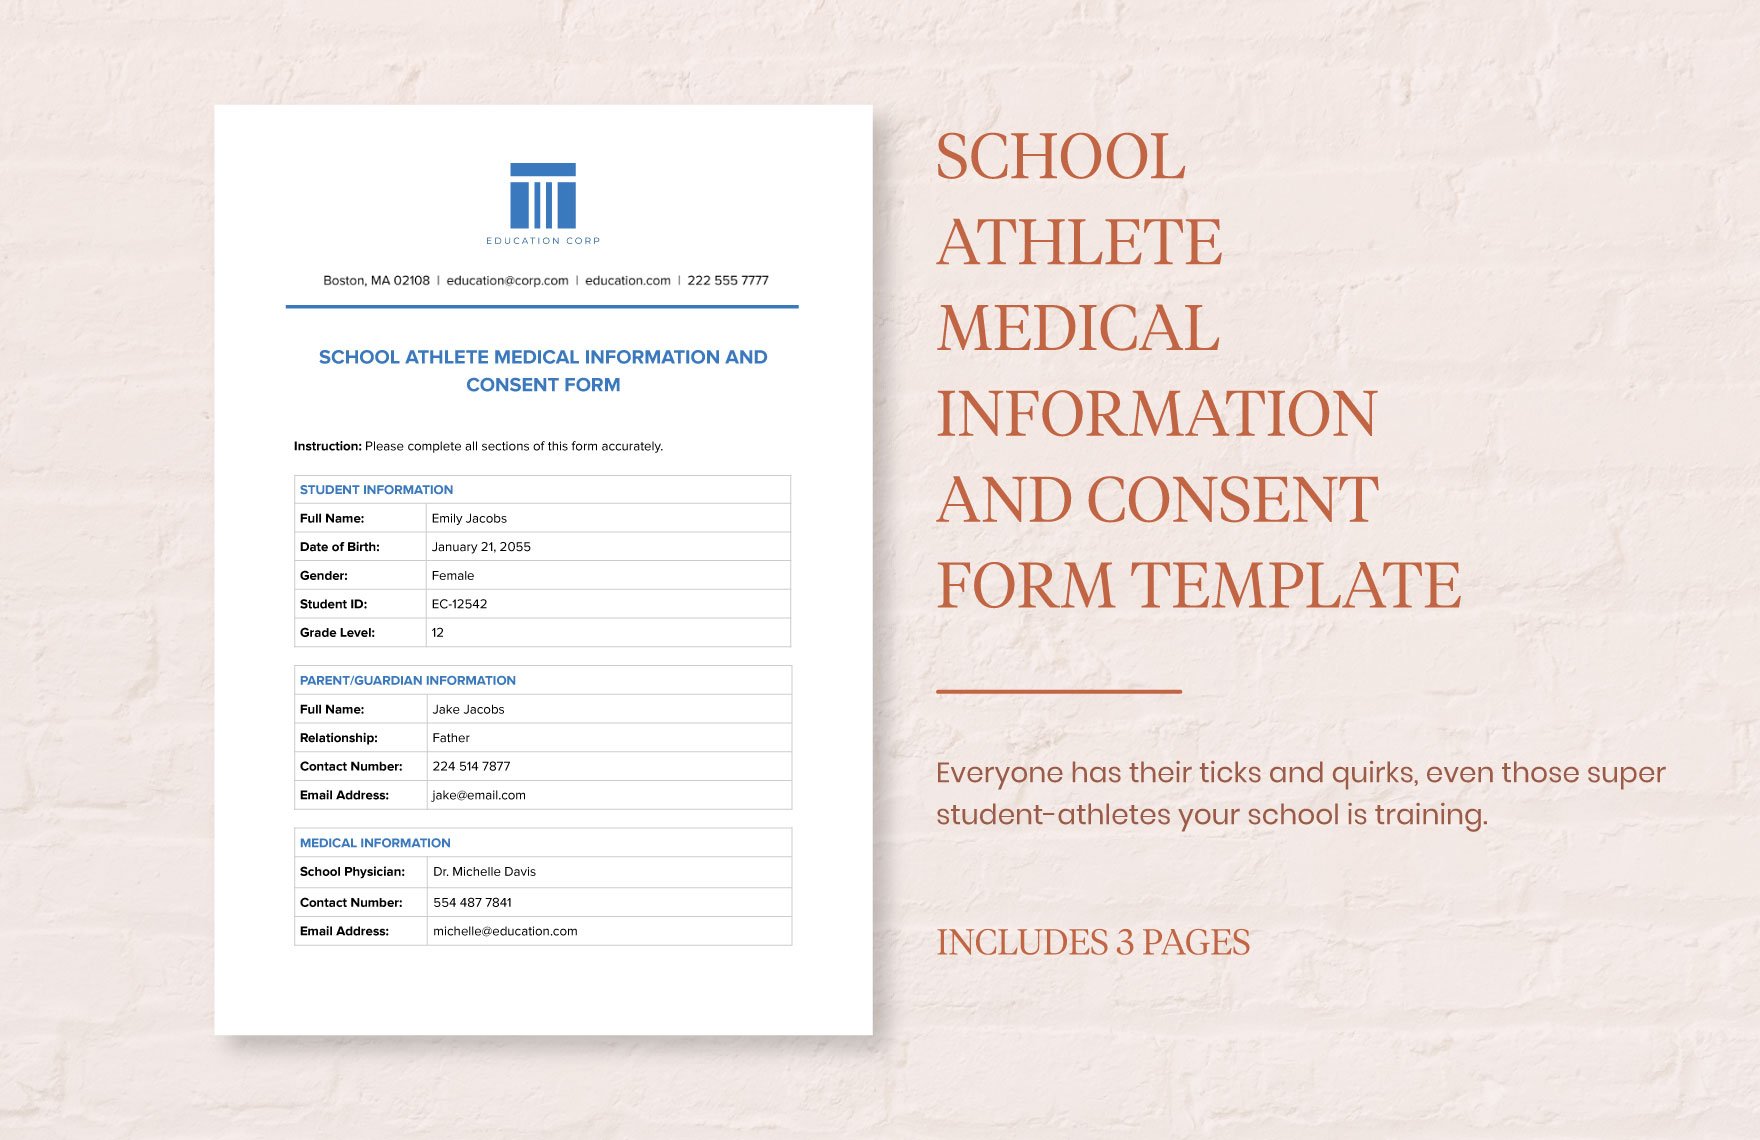 School Athlete Medical Information and Consent Form Template